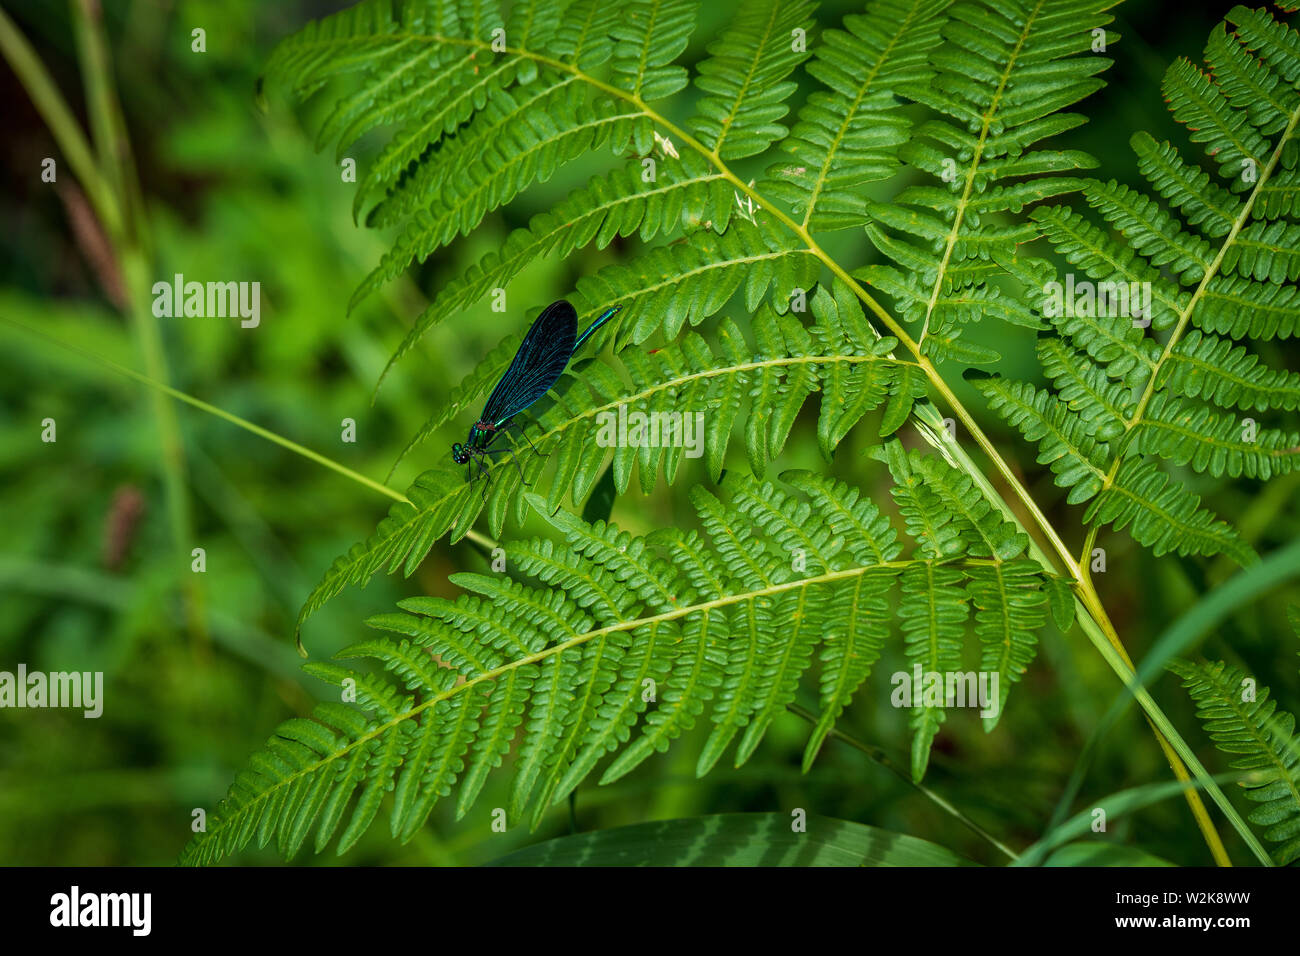 Blueish colored dragonfly sitting on the leave of a fern at the Plitvice Lakes National Park in Croatia Stock Photo